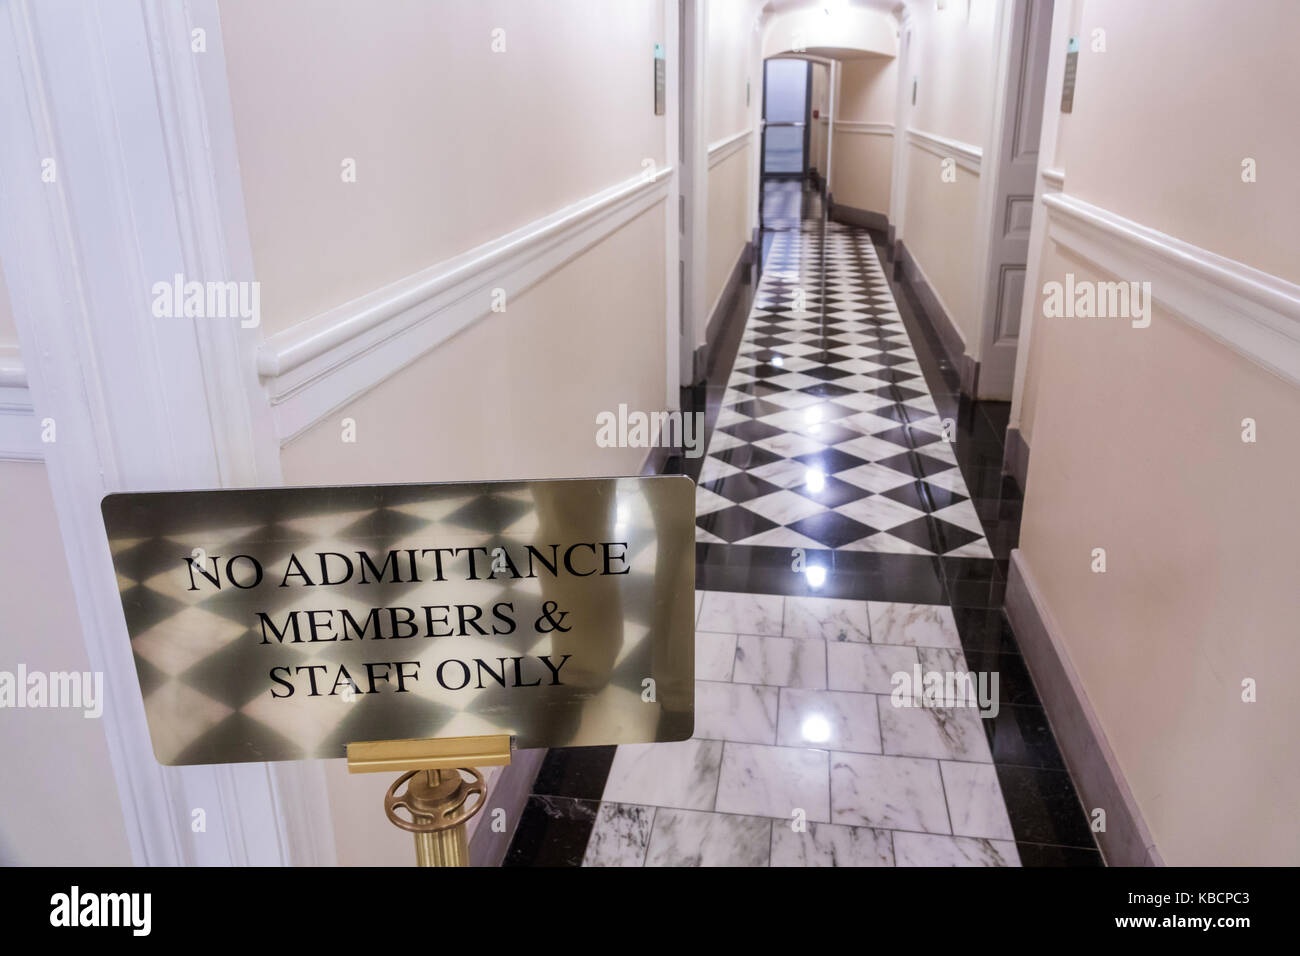 Richmond Virginia,Virginia State Capitol building,restricted area,sign,members,staff only,interior inside,no admittance,VA170523043 Stock Photo